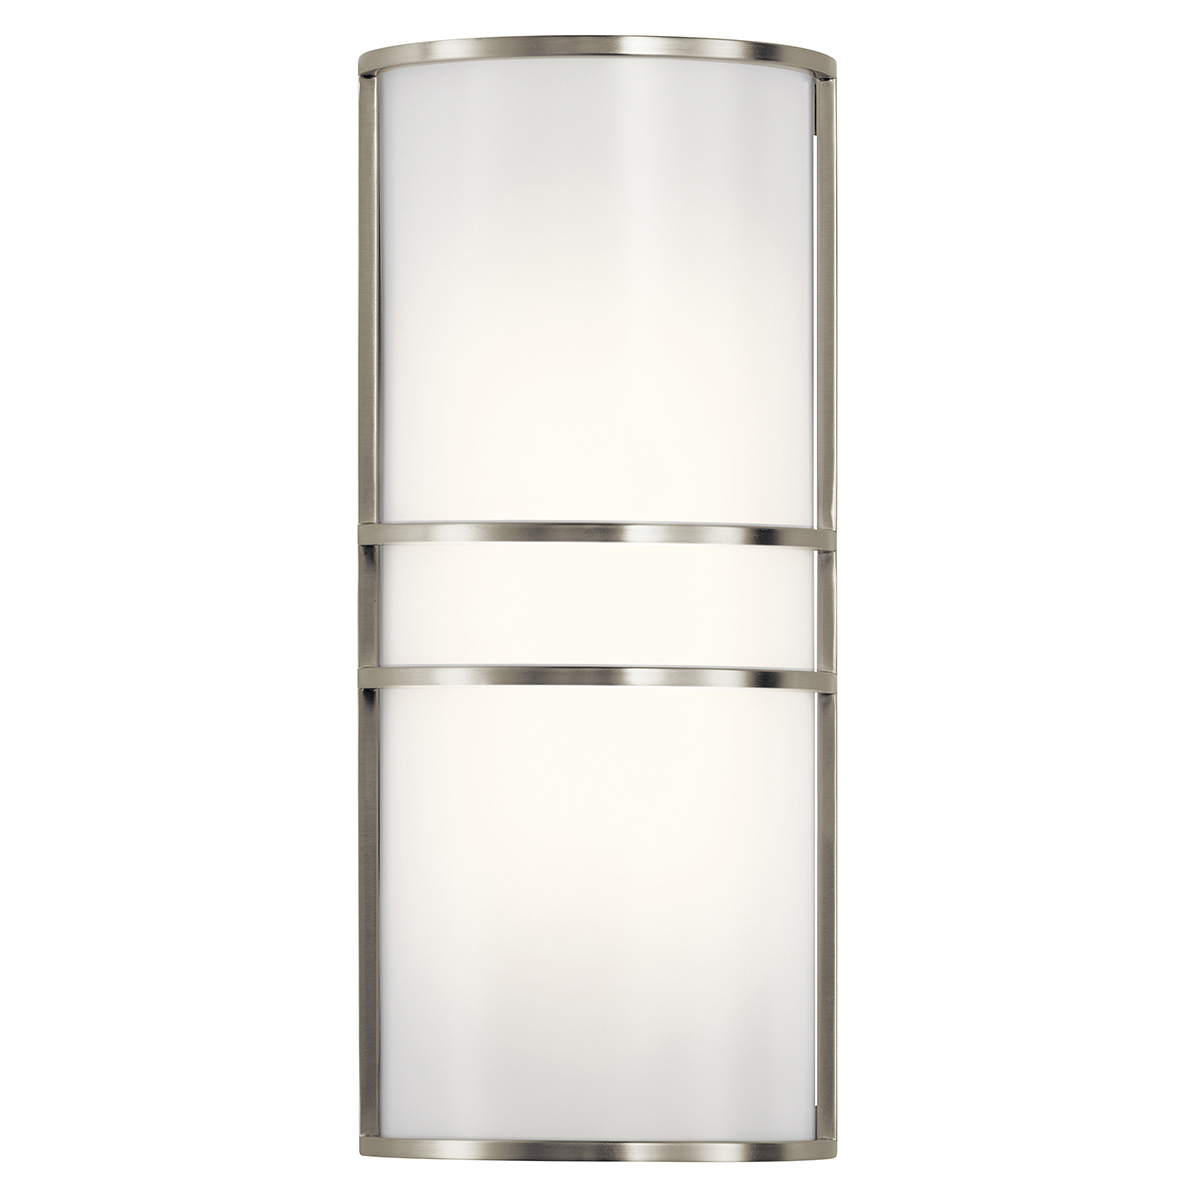 2 Light LED Wall Sconce Brushed Nickel